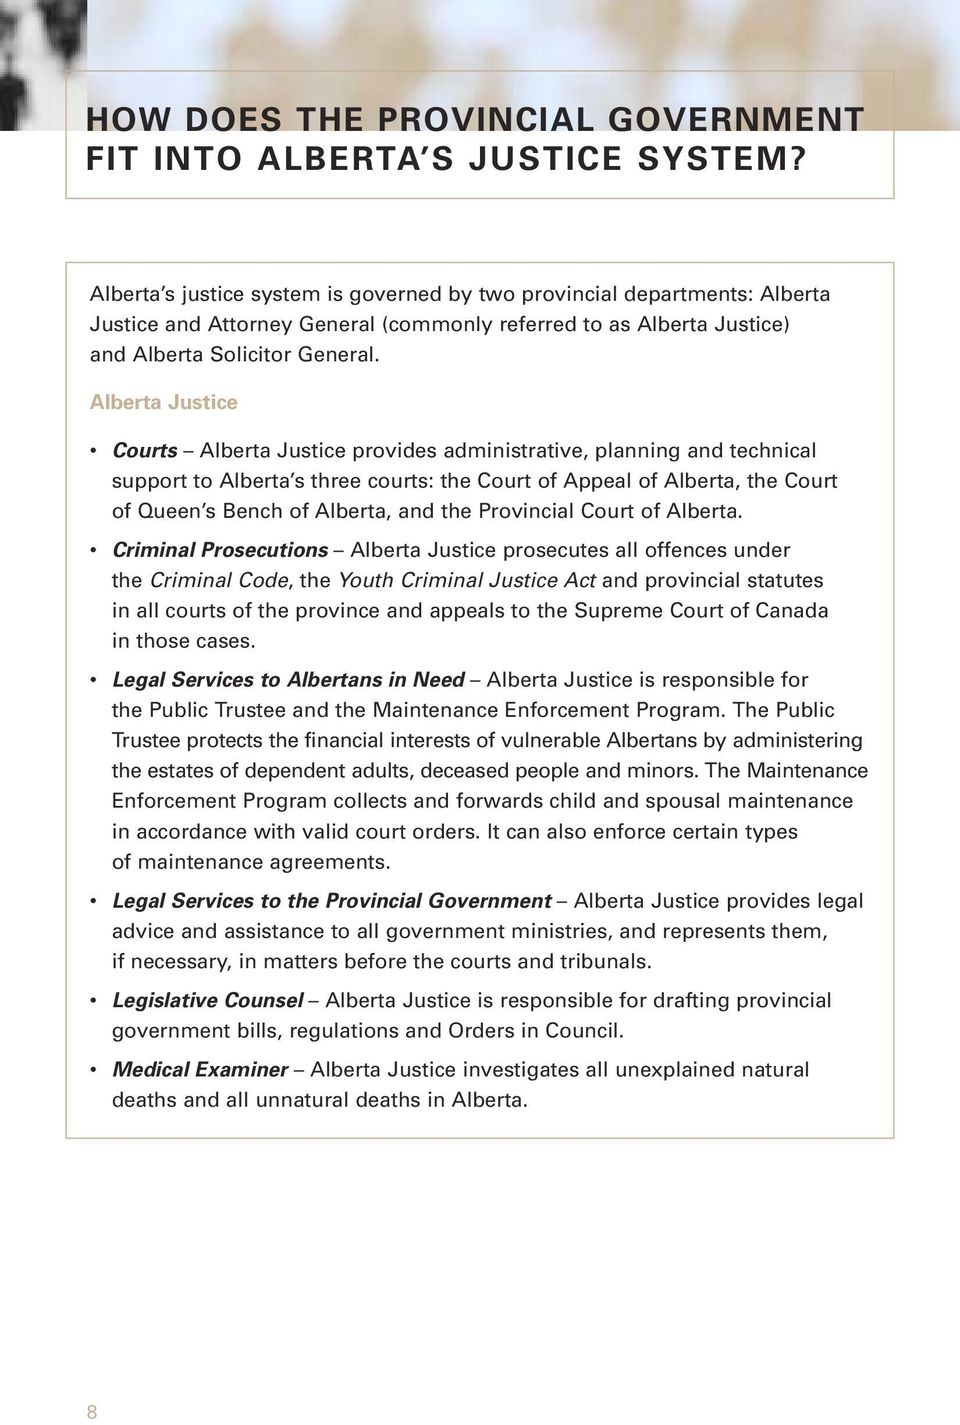 Alberta Justice Courts Alberta Justice provides administrative, planning and technical support to Alberta s three courts: the Court of Appeal of Alberta, the Court of Queen s Bench of Alberta, and